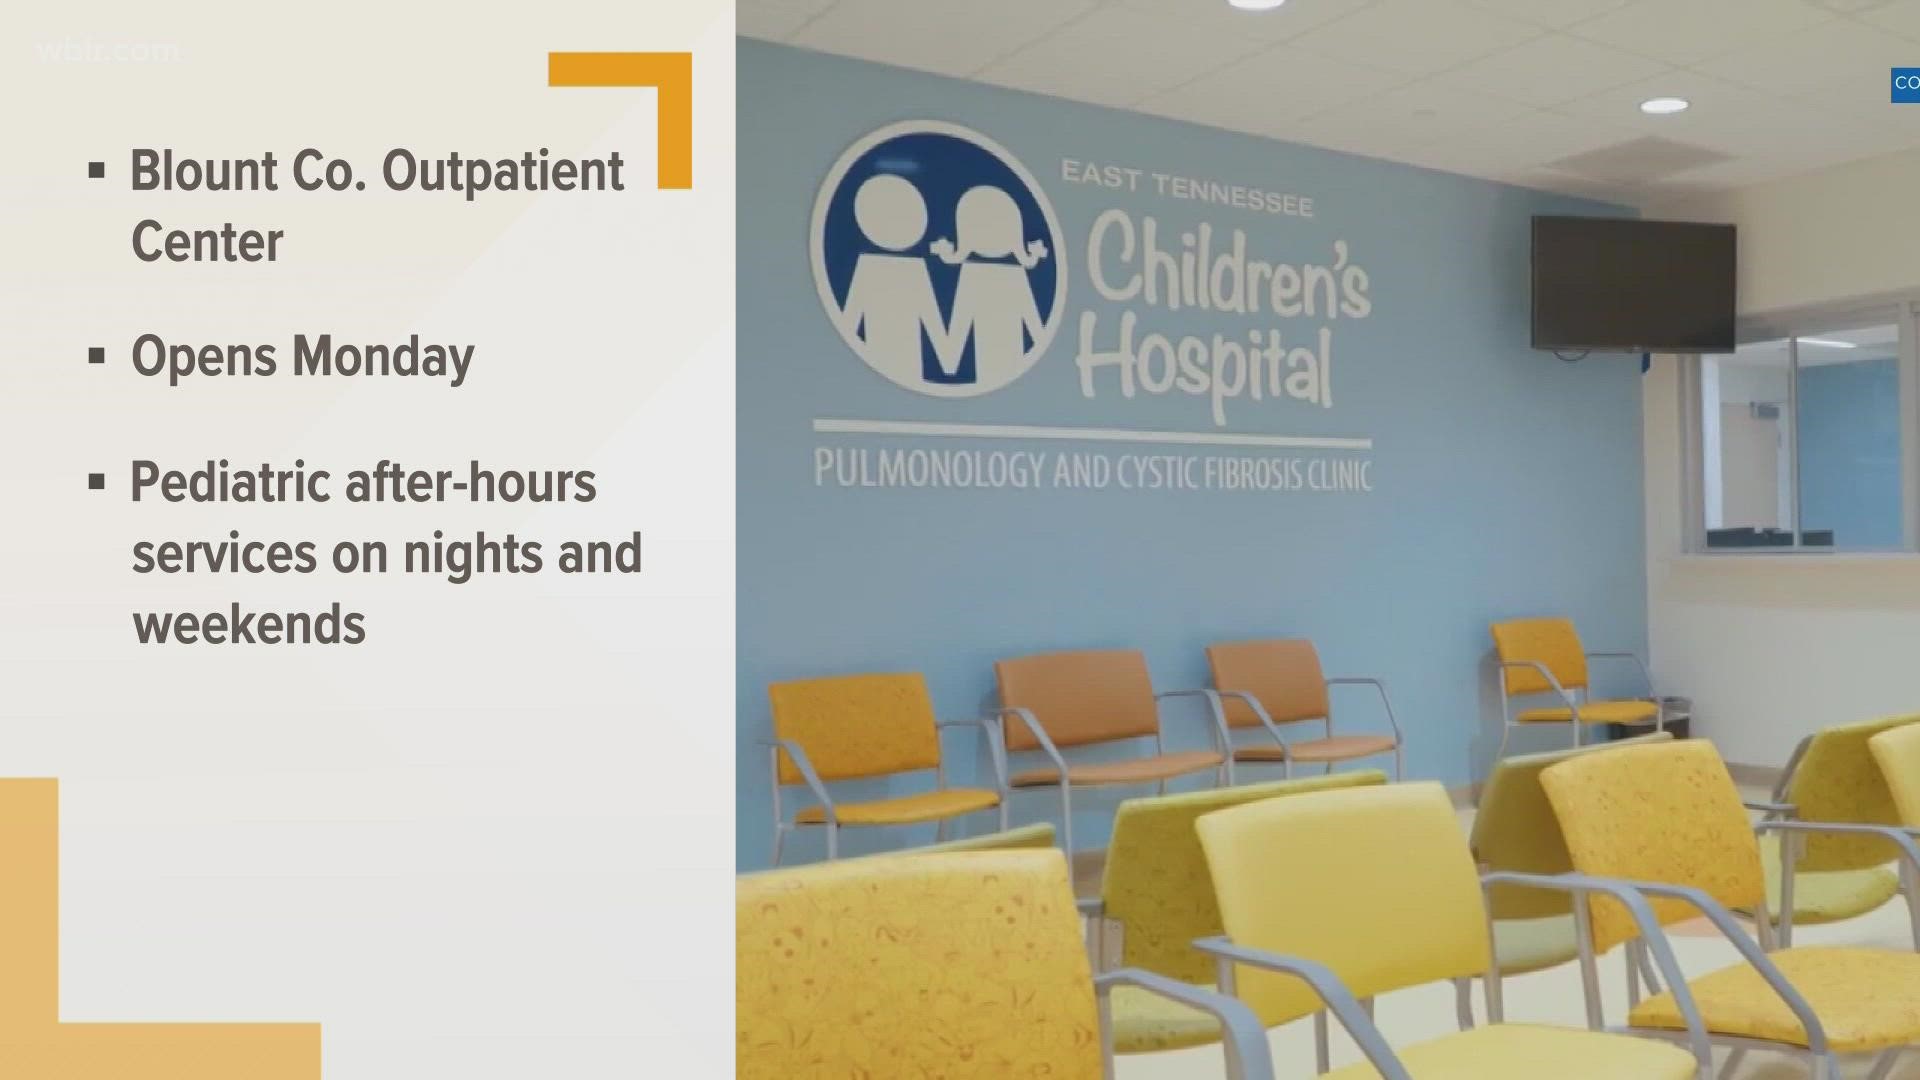 The center will treat children from birth to age 21 for minor accidents or illnesses.